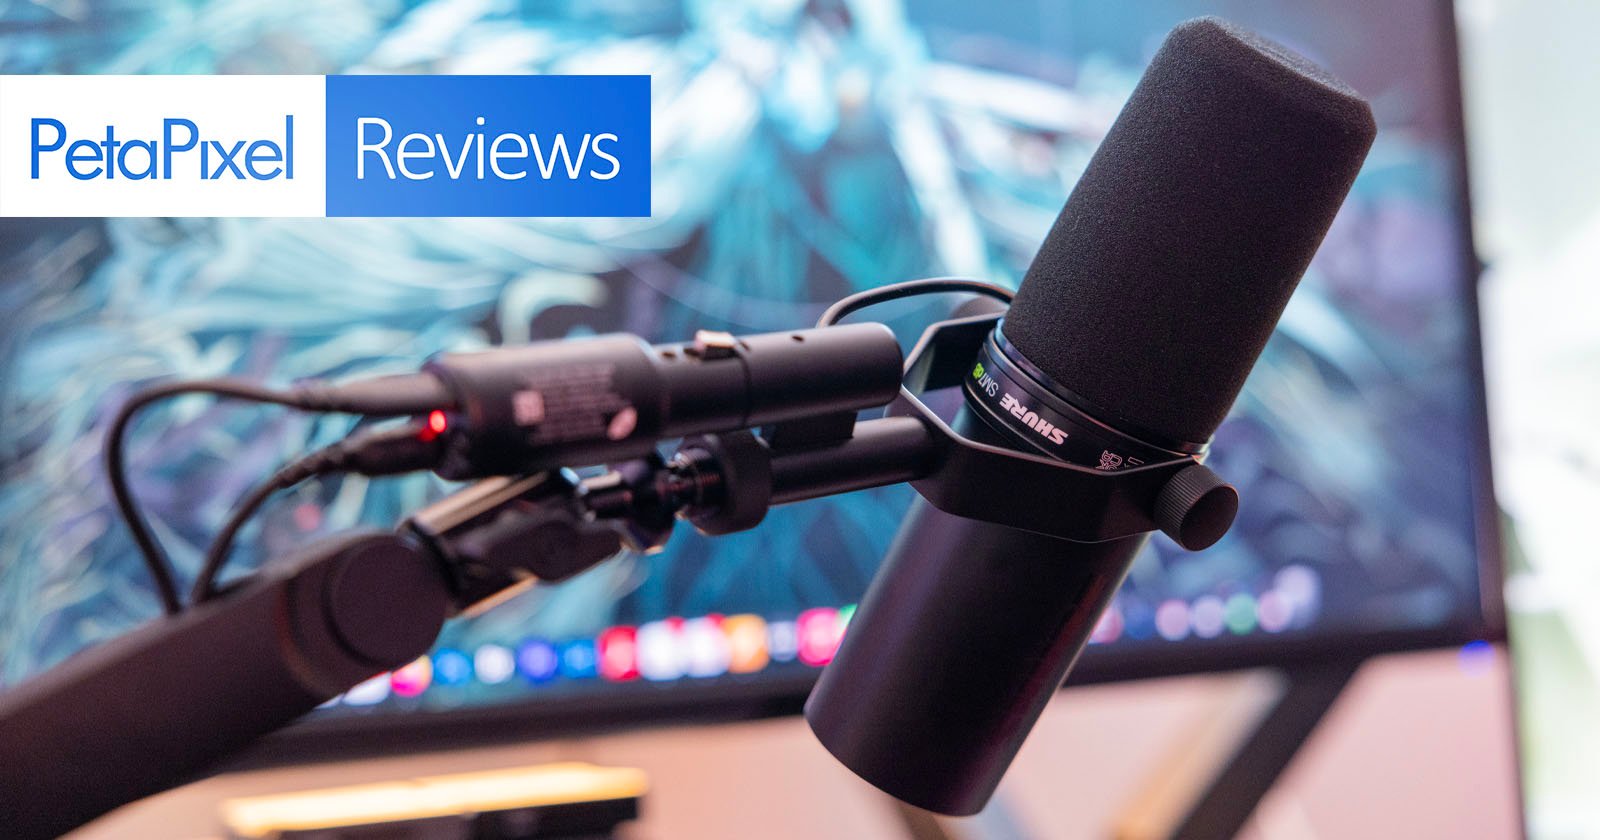 Getting the Most From Your Shure SM7B Microphone 